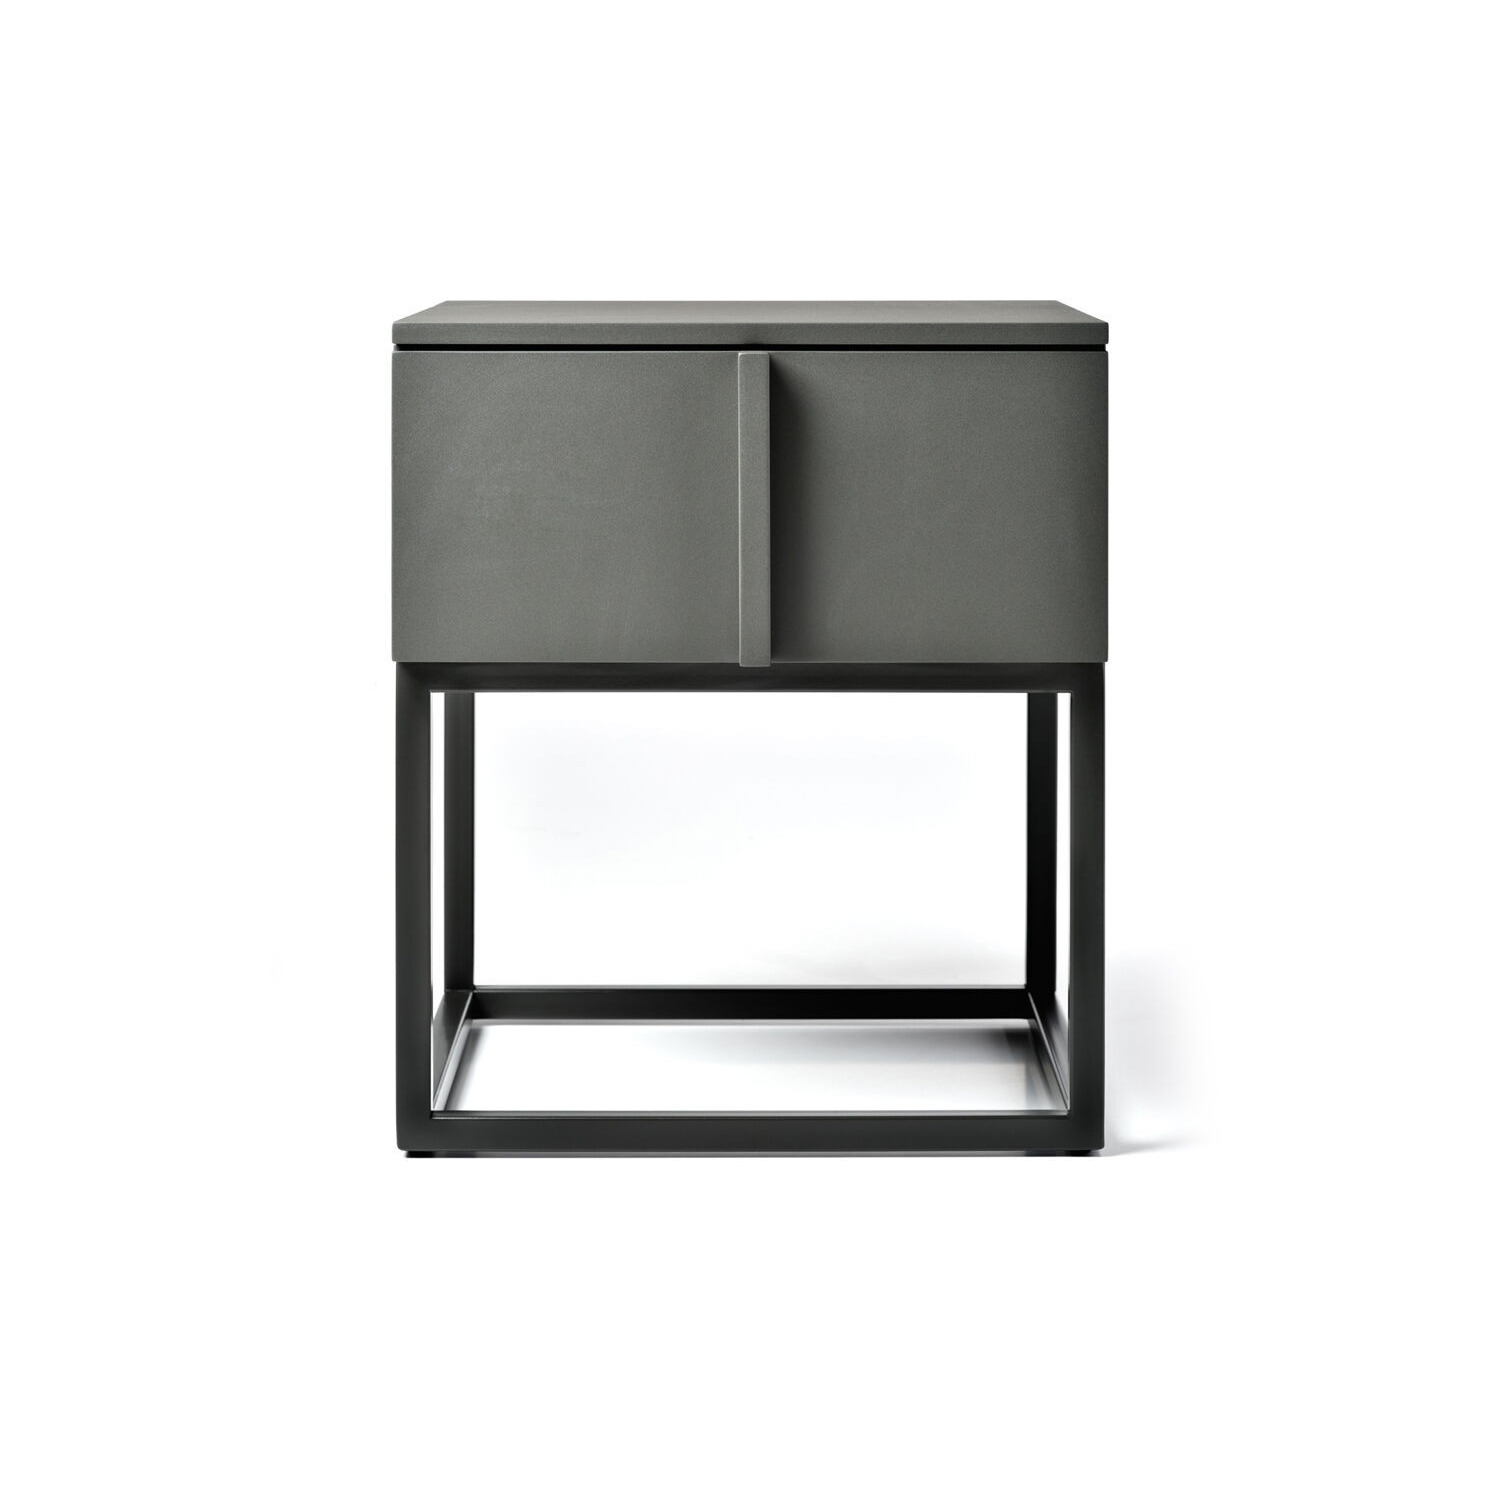 "Hana Lacquered Bedside Table 50cm, One Drawer, Grey "